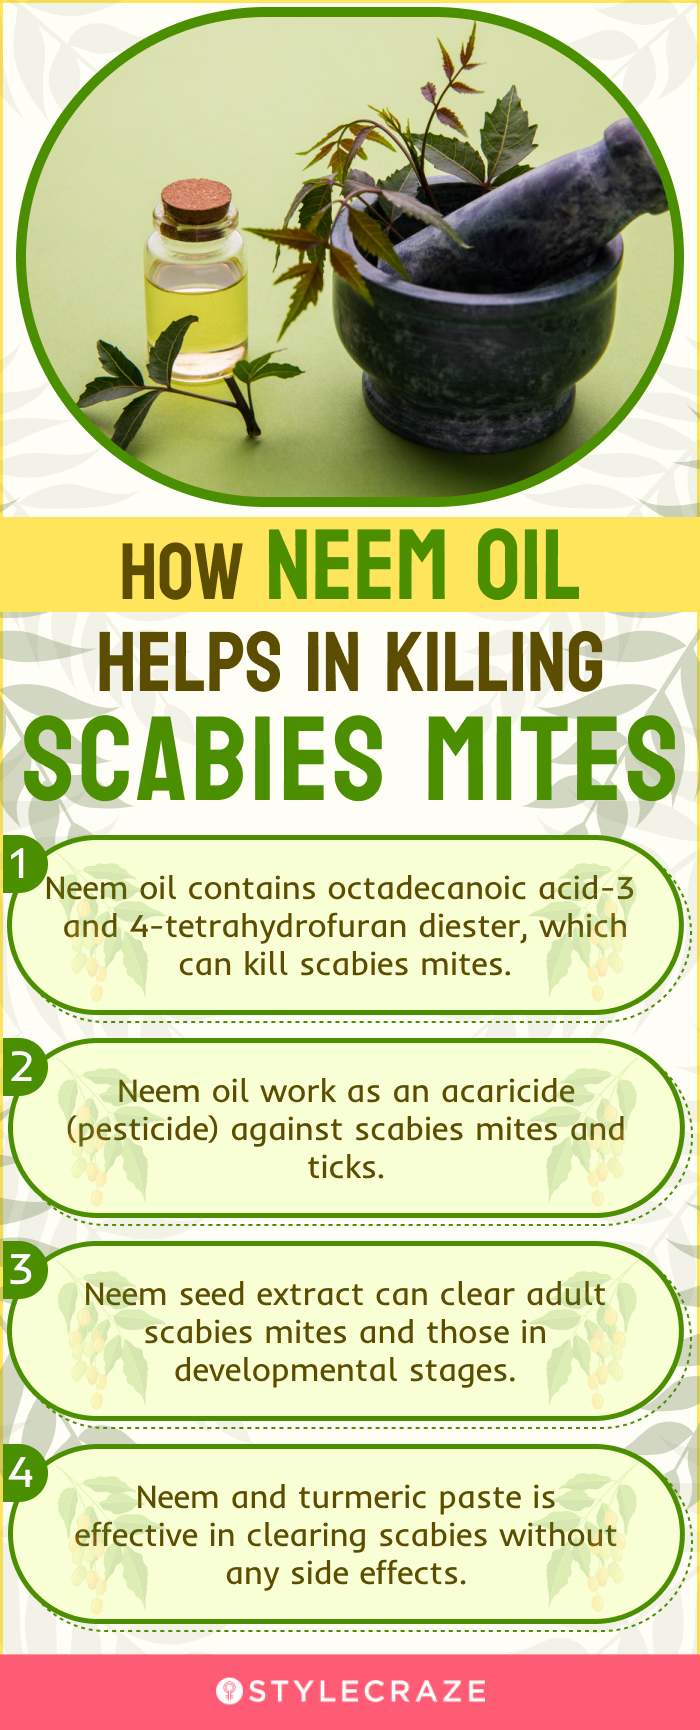 how neem oil helps in killing scabies mites (infographic)